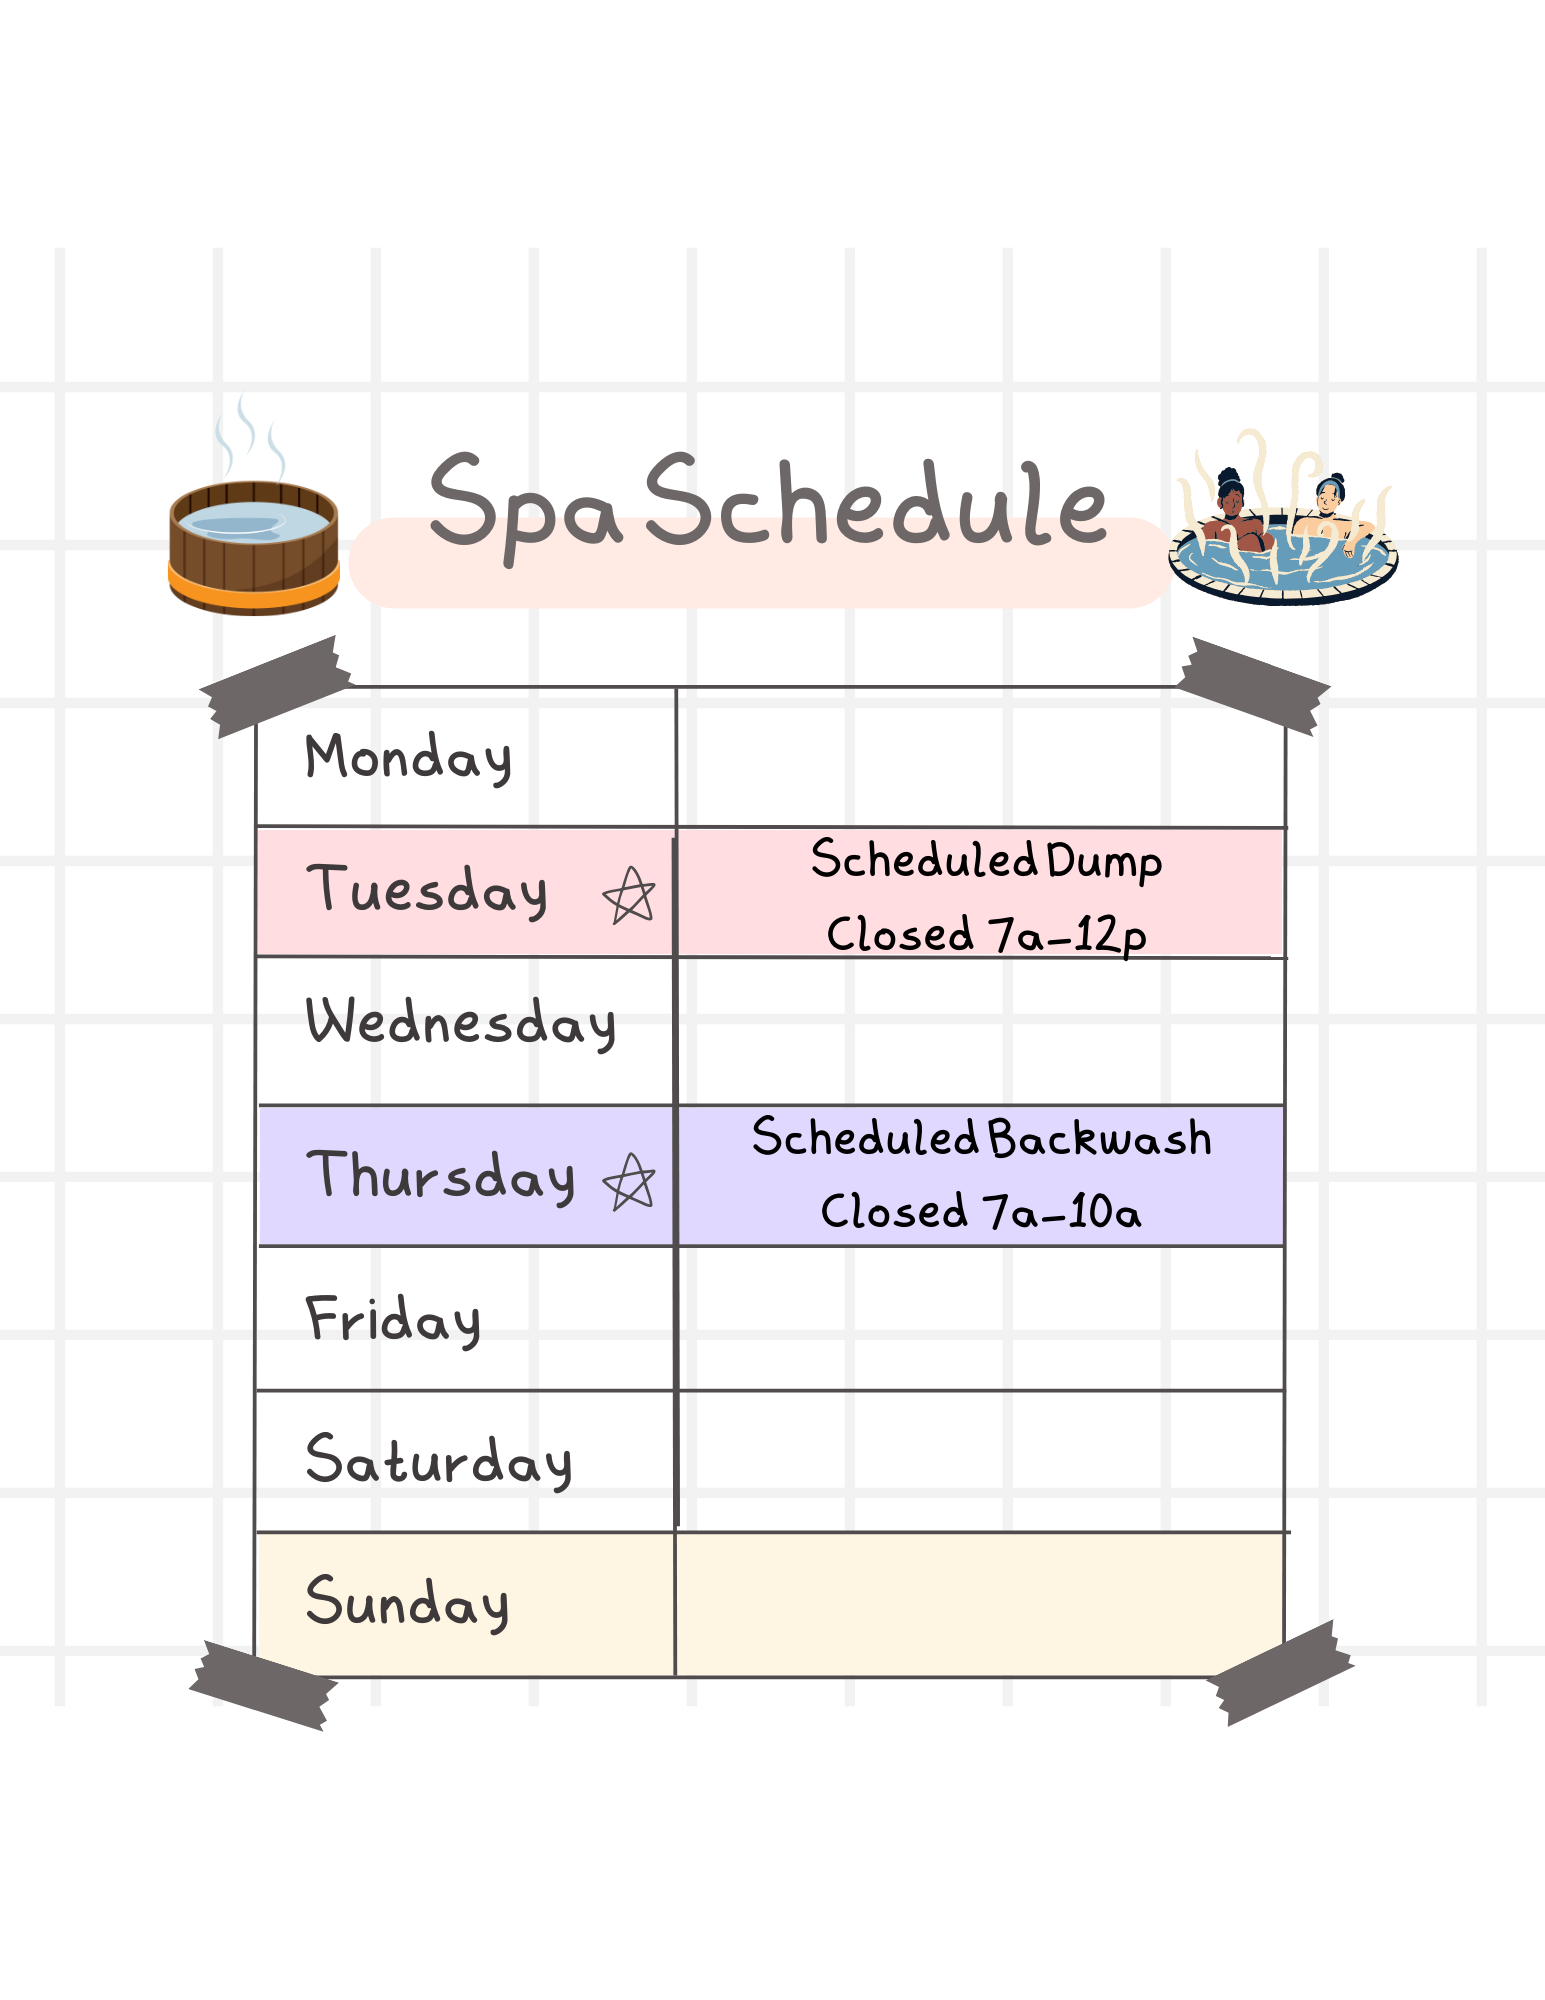 A whimsical spa schedule graphic showing a weekly timetable with cartoonish illustrations. On the top left, a wooden hot tub with steam rising and on the top right, two people relaxing in a pool float. The schedule lists days of the week with specific maintenance activities and closure times for Tuesday 7am to Noon and Thursday mornings is a scheduled backwash 7am - 10am.